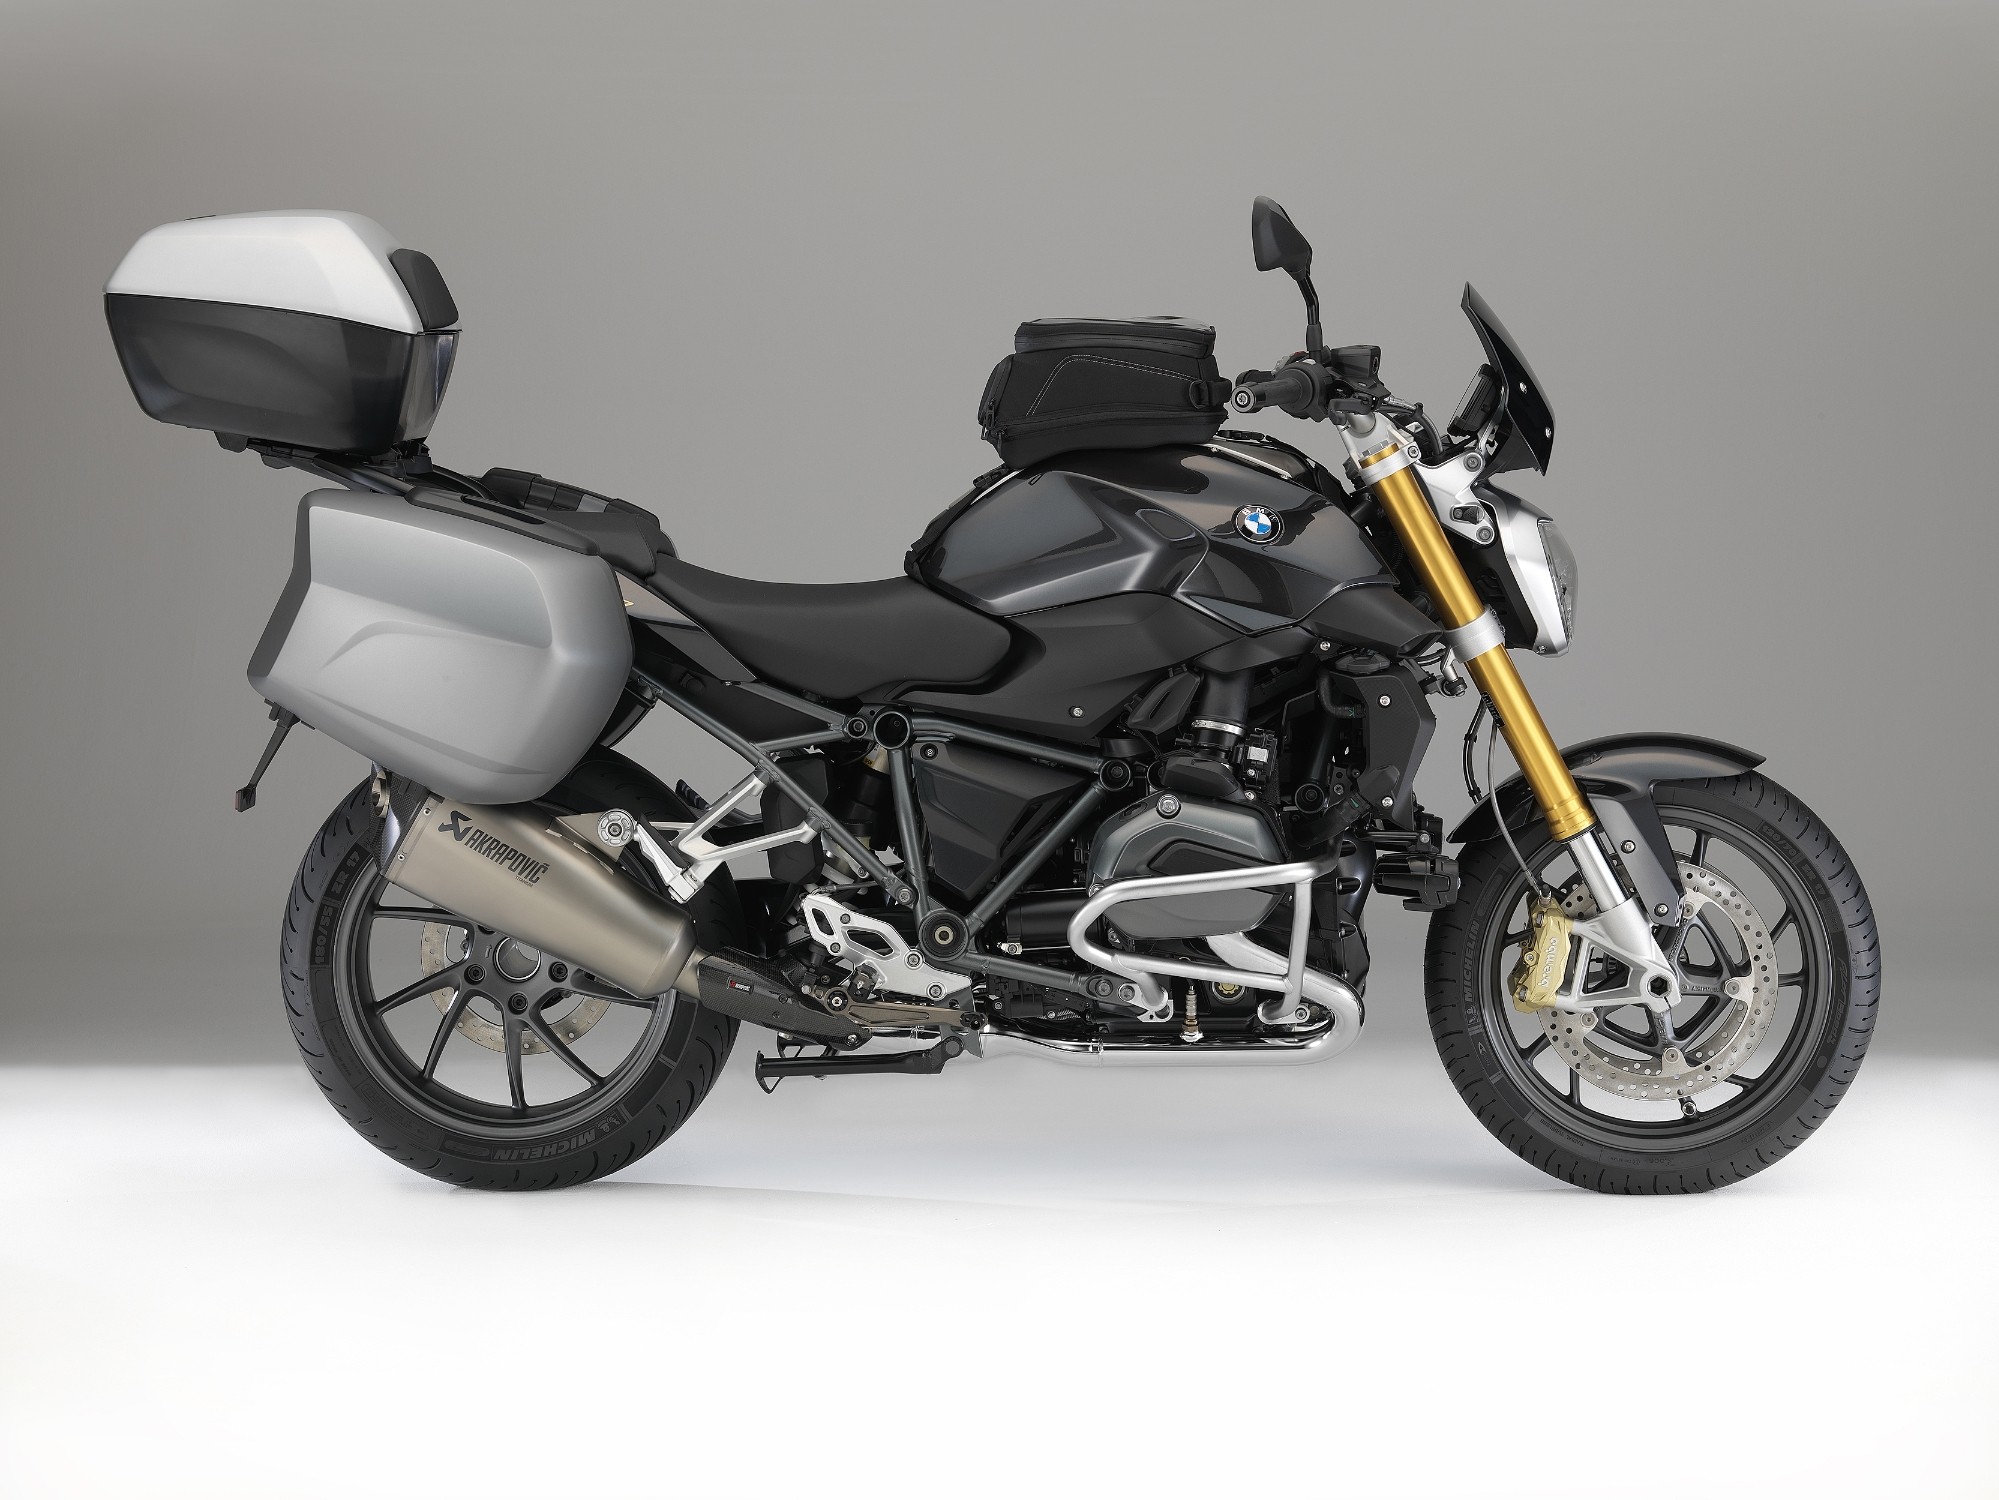 BMW R 1200 R with special accessories: and topcas small incl. luggage grid; Akrapović Sport silencer; footrests, milled, adjustable; crash bars; LED auxiliary headlights; tank bag small, Navigator V, windscreen Sport,